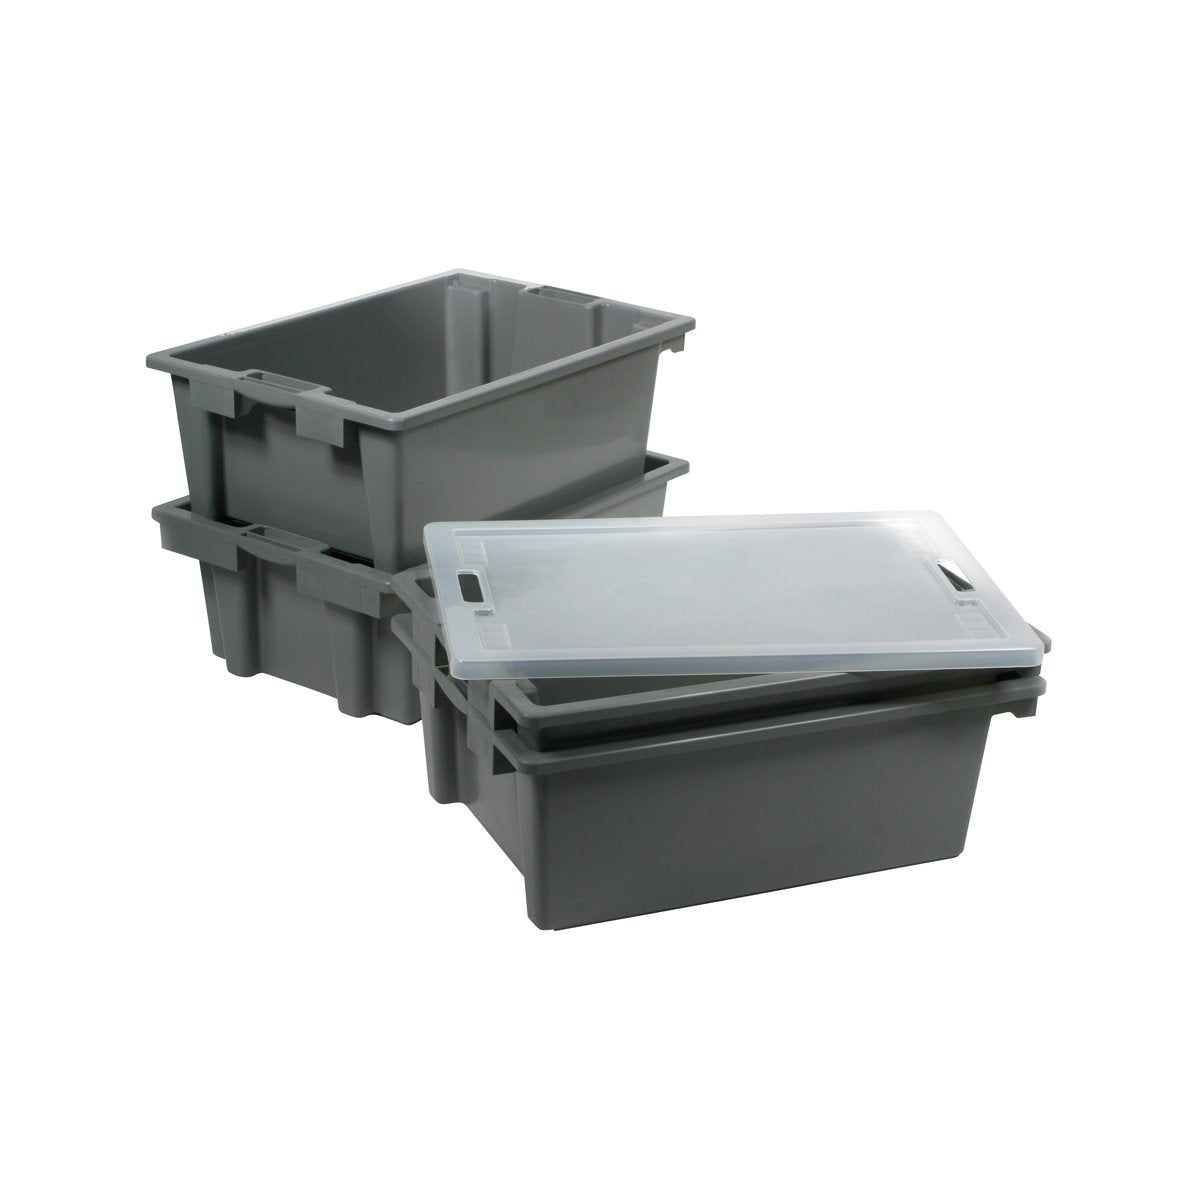 09616 Unica Tote Box Stackable Grey Suits 9600 660x450x230mm Tomkin Australia Hospitality Supplies